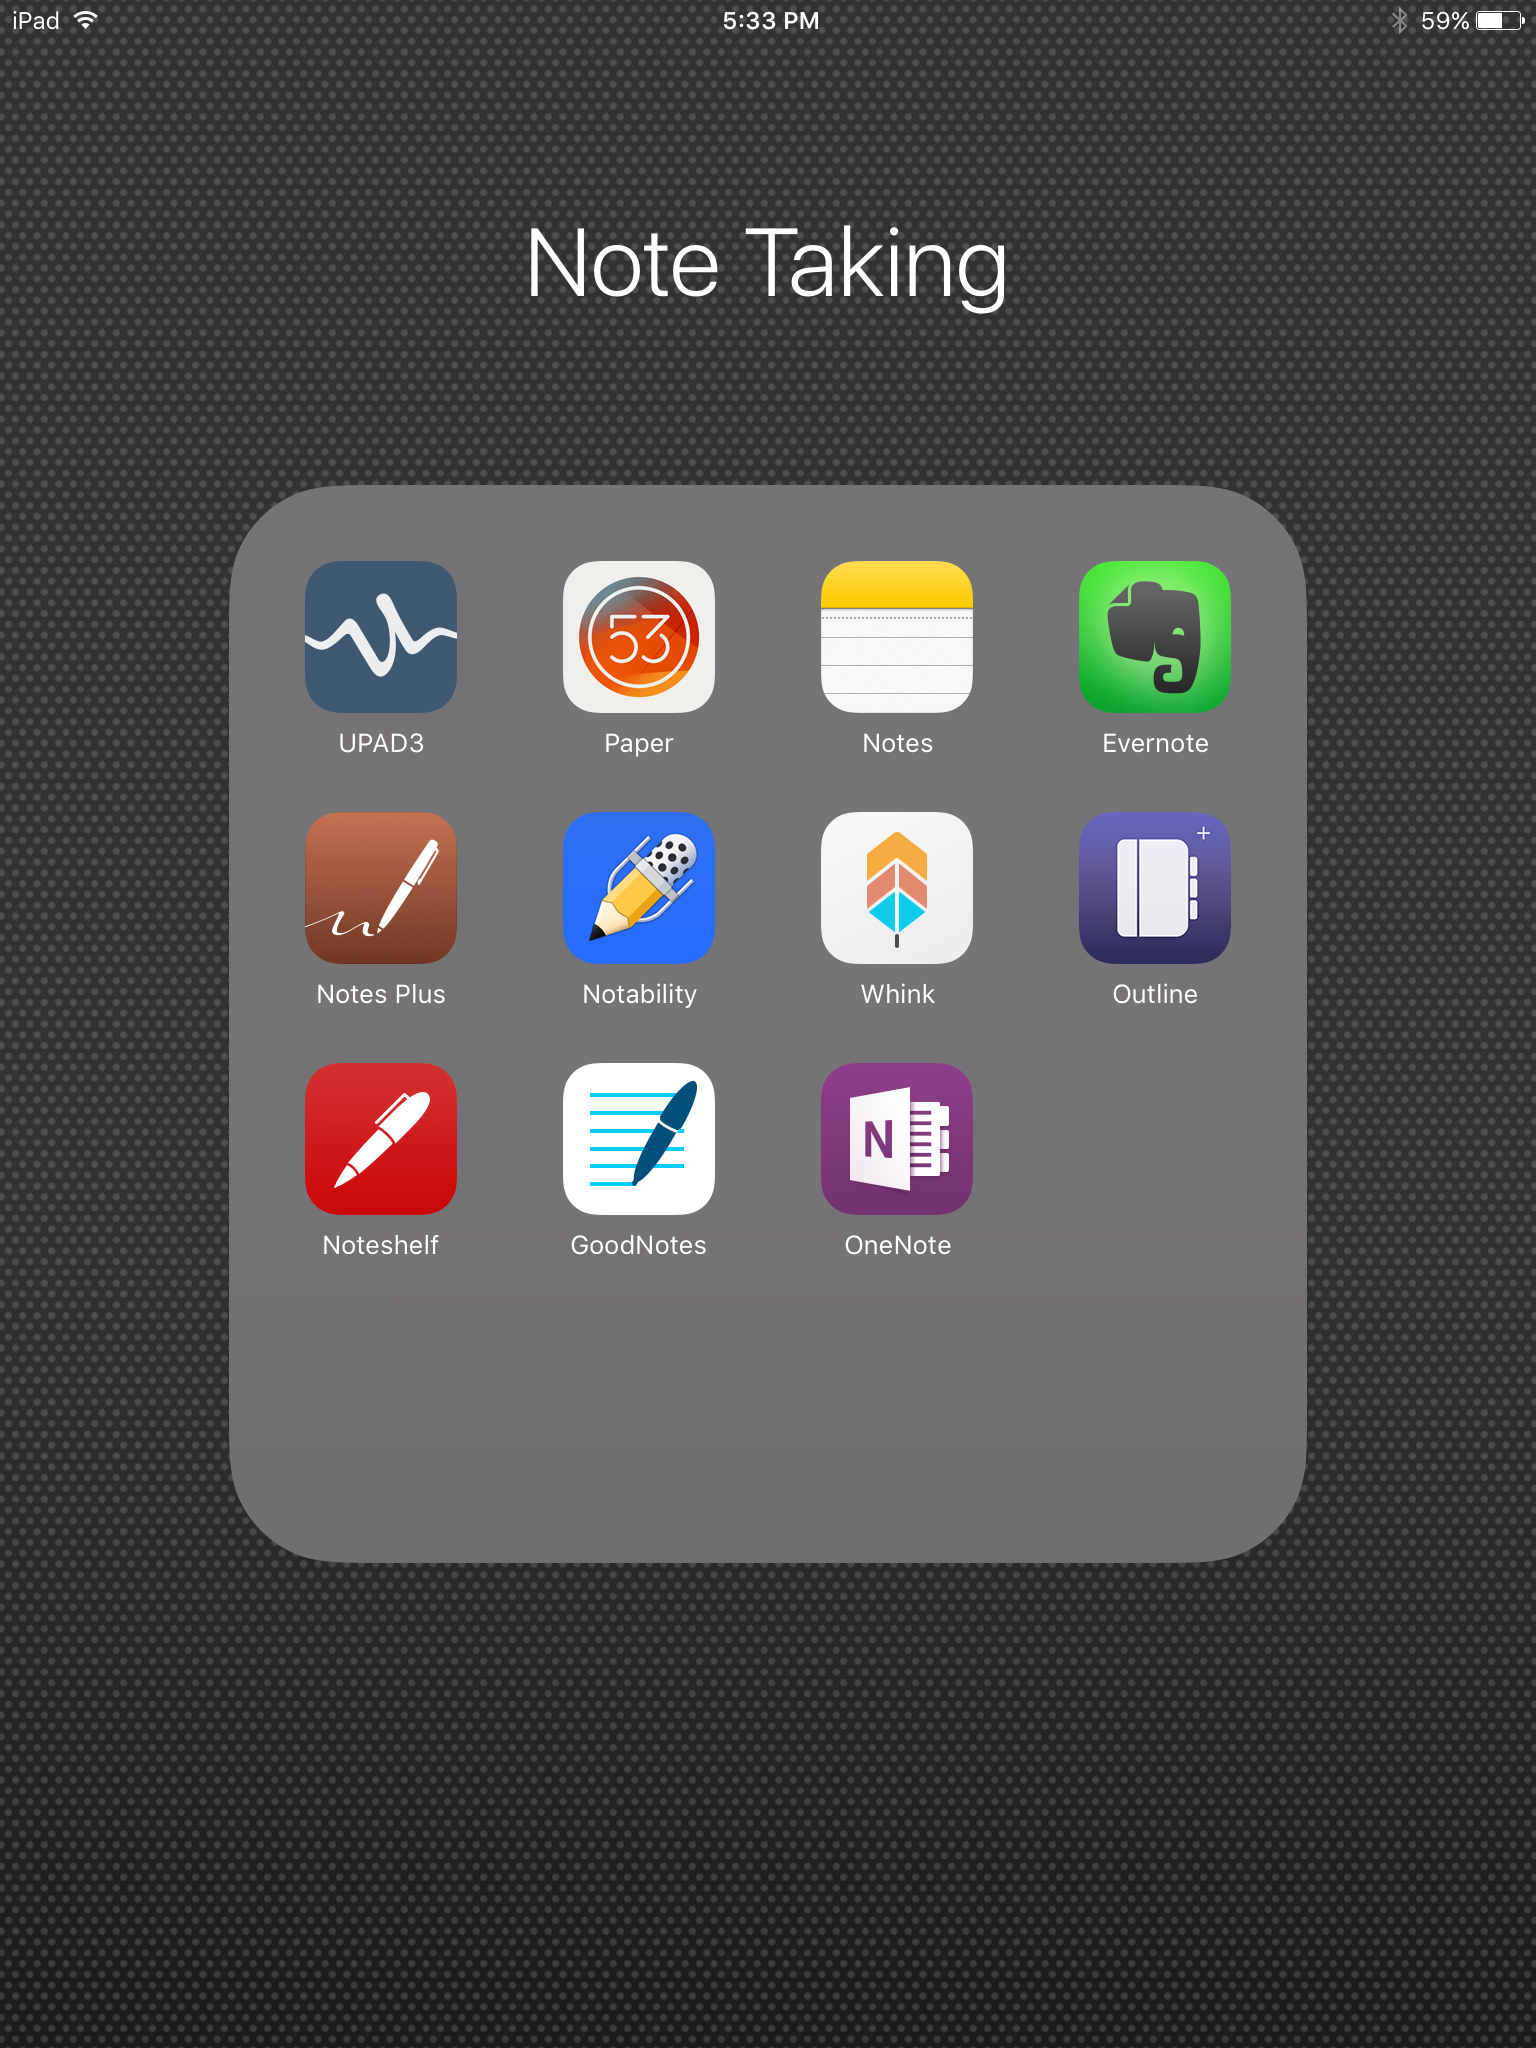 Detailed Review for Note Taking Apps with iPad Pro and 